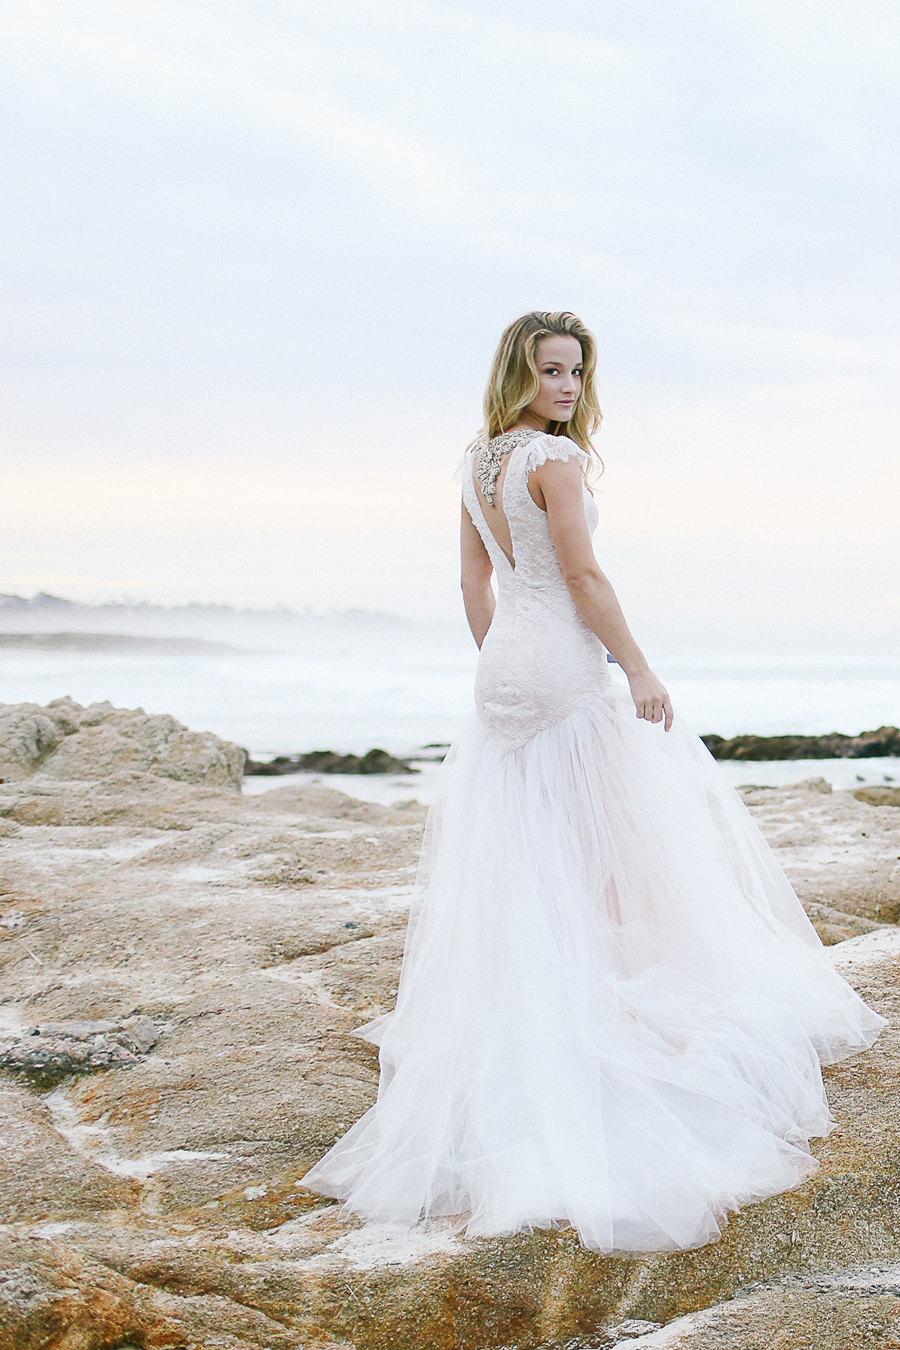 Hochzeit - Tulle wedding dress, wedding gown, lace dress, beach wedding, glamorous and sexy, sleeves, fit and flare gown for untraditional brides